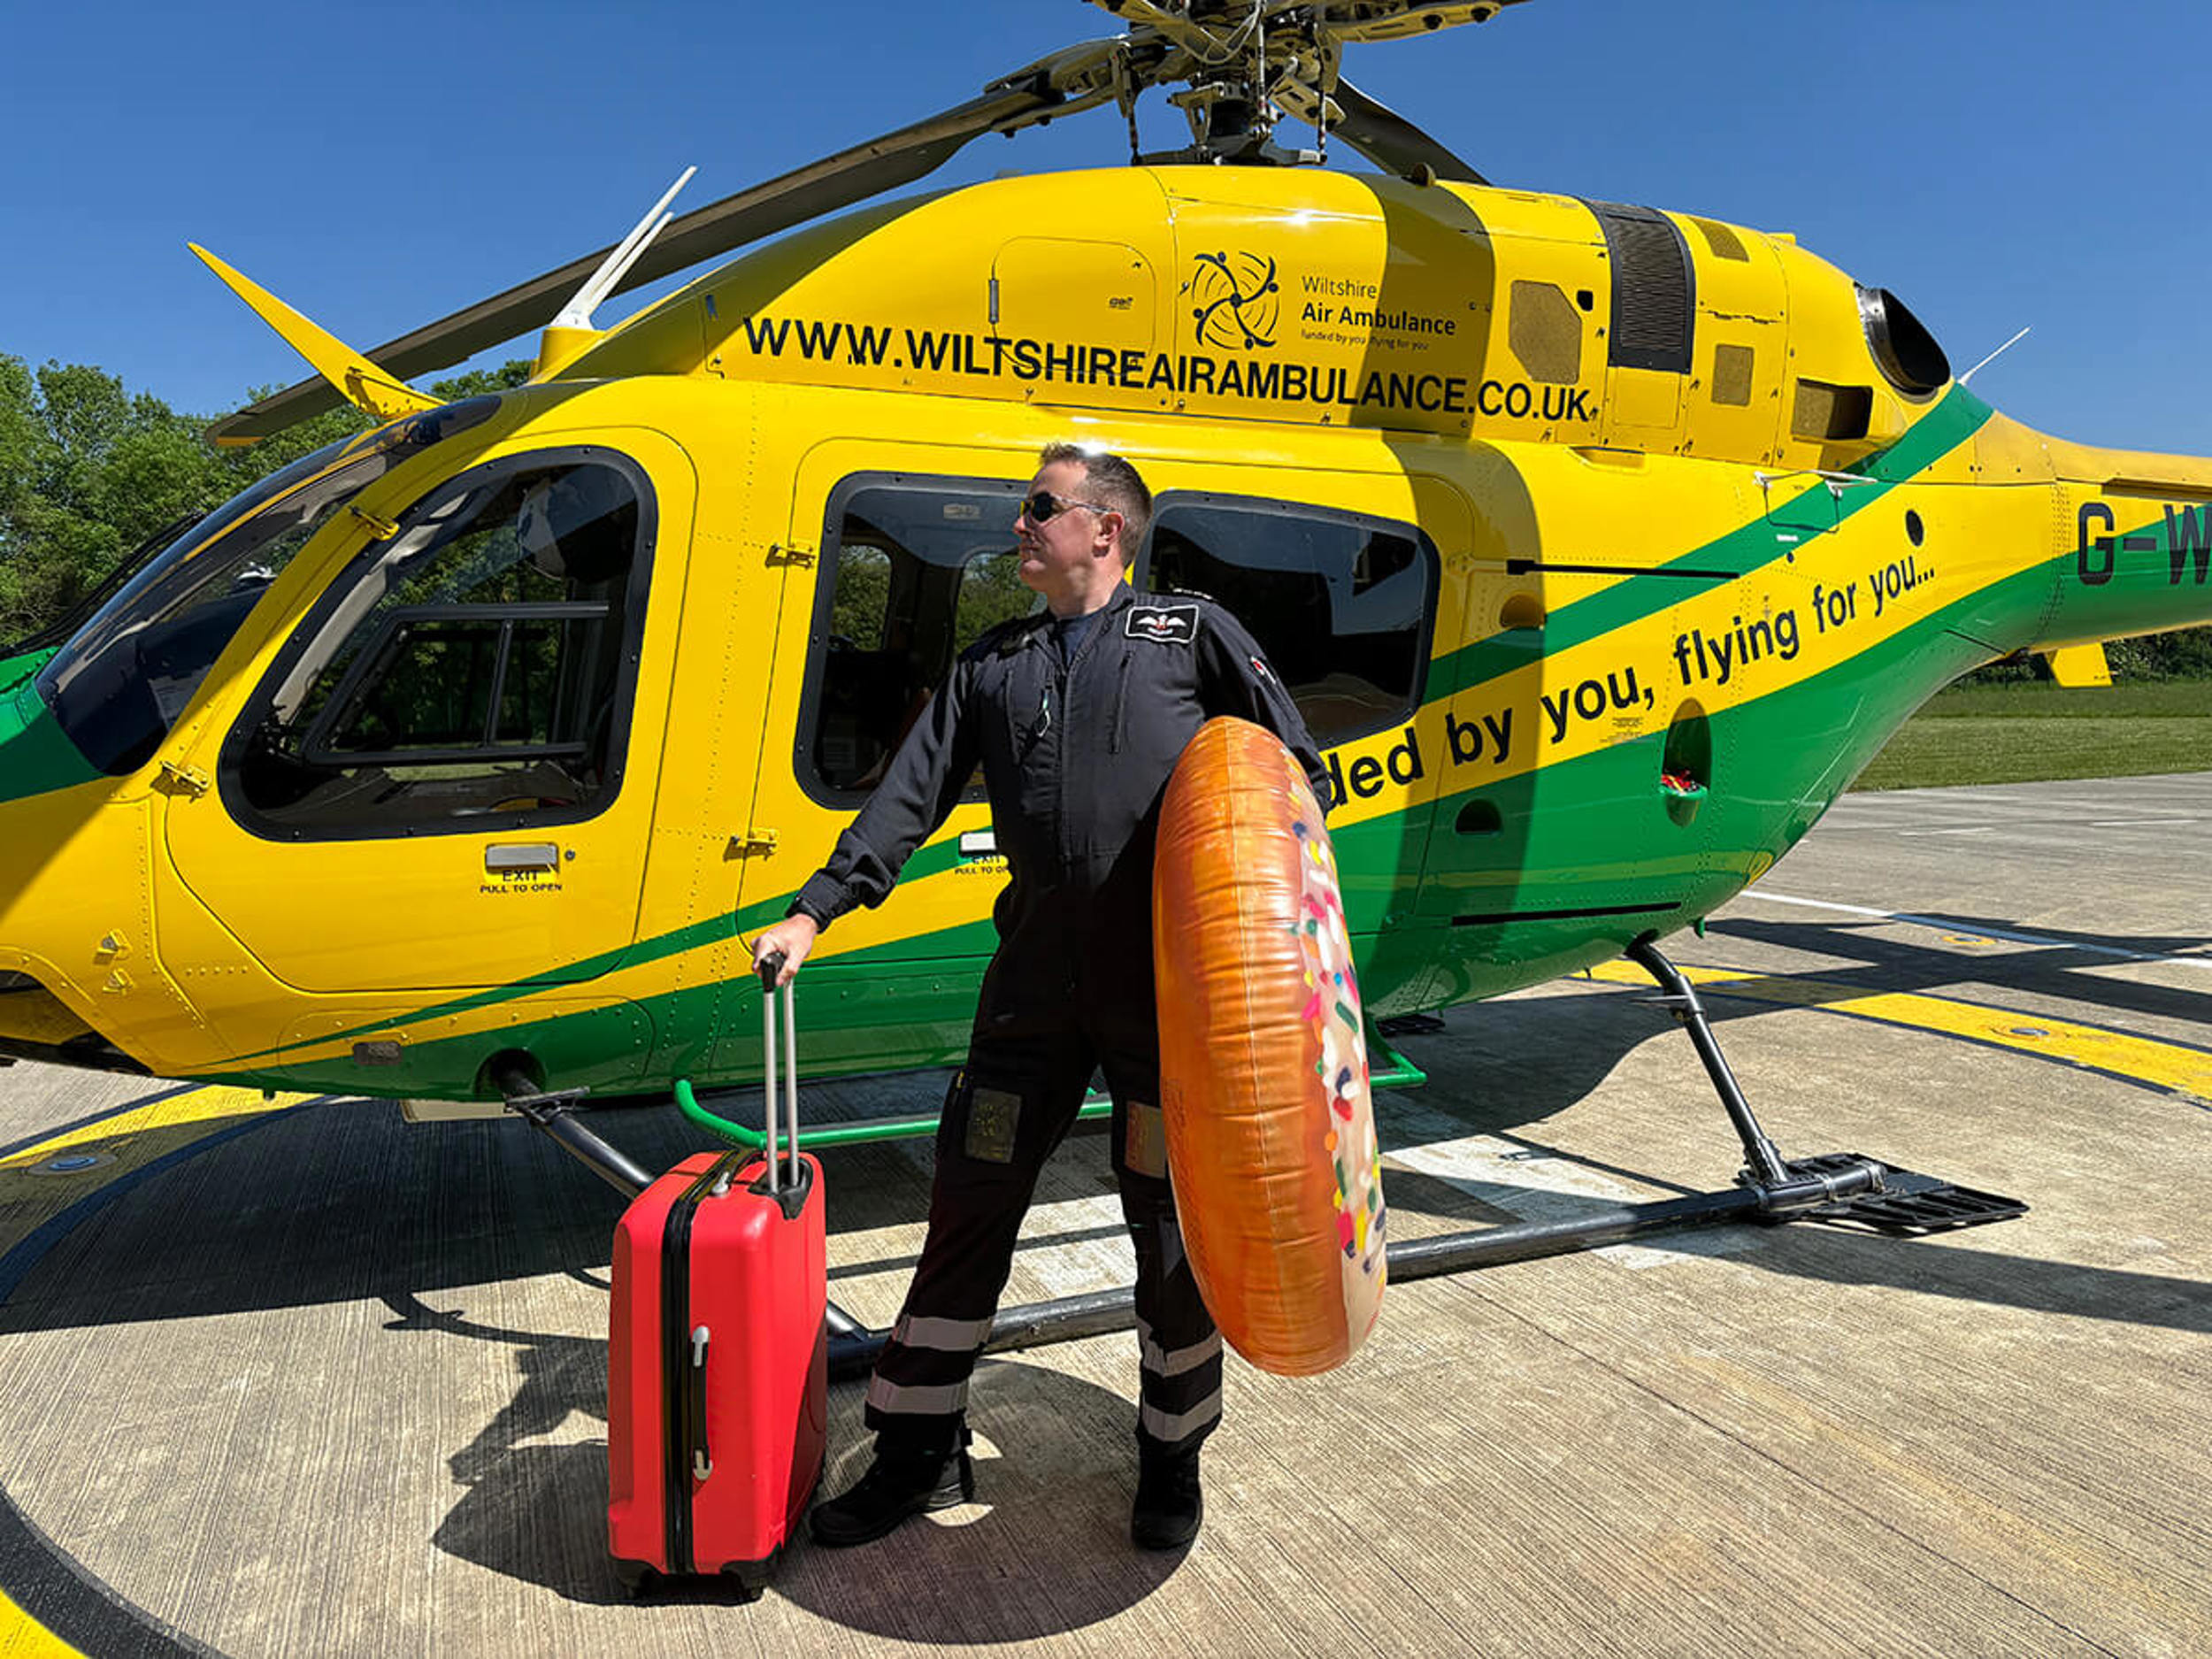 A pilot stood in front of the WAA helicopter with a suitcase and giant inflatable